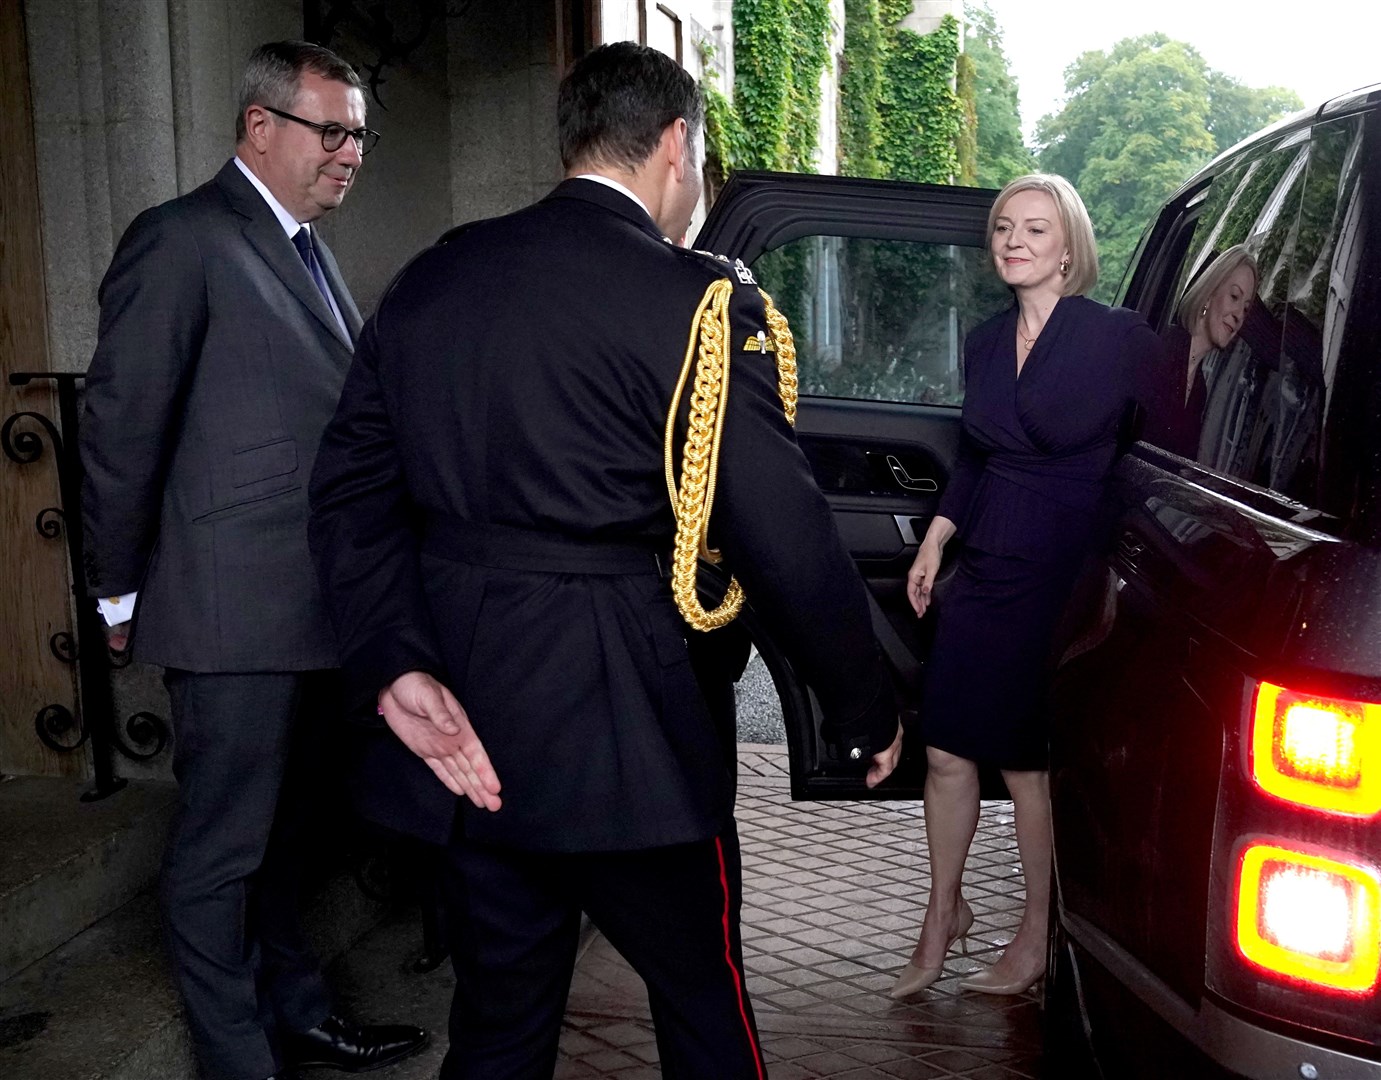 Liz Truss was greeted by the Queen’s equerry Lieutenant Colonel Tom White and her private secretary Sir Edward Young as she arrived at Balmoral (Andrew Milligan/PA)